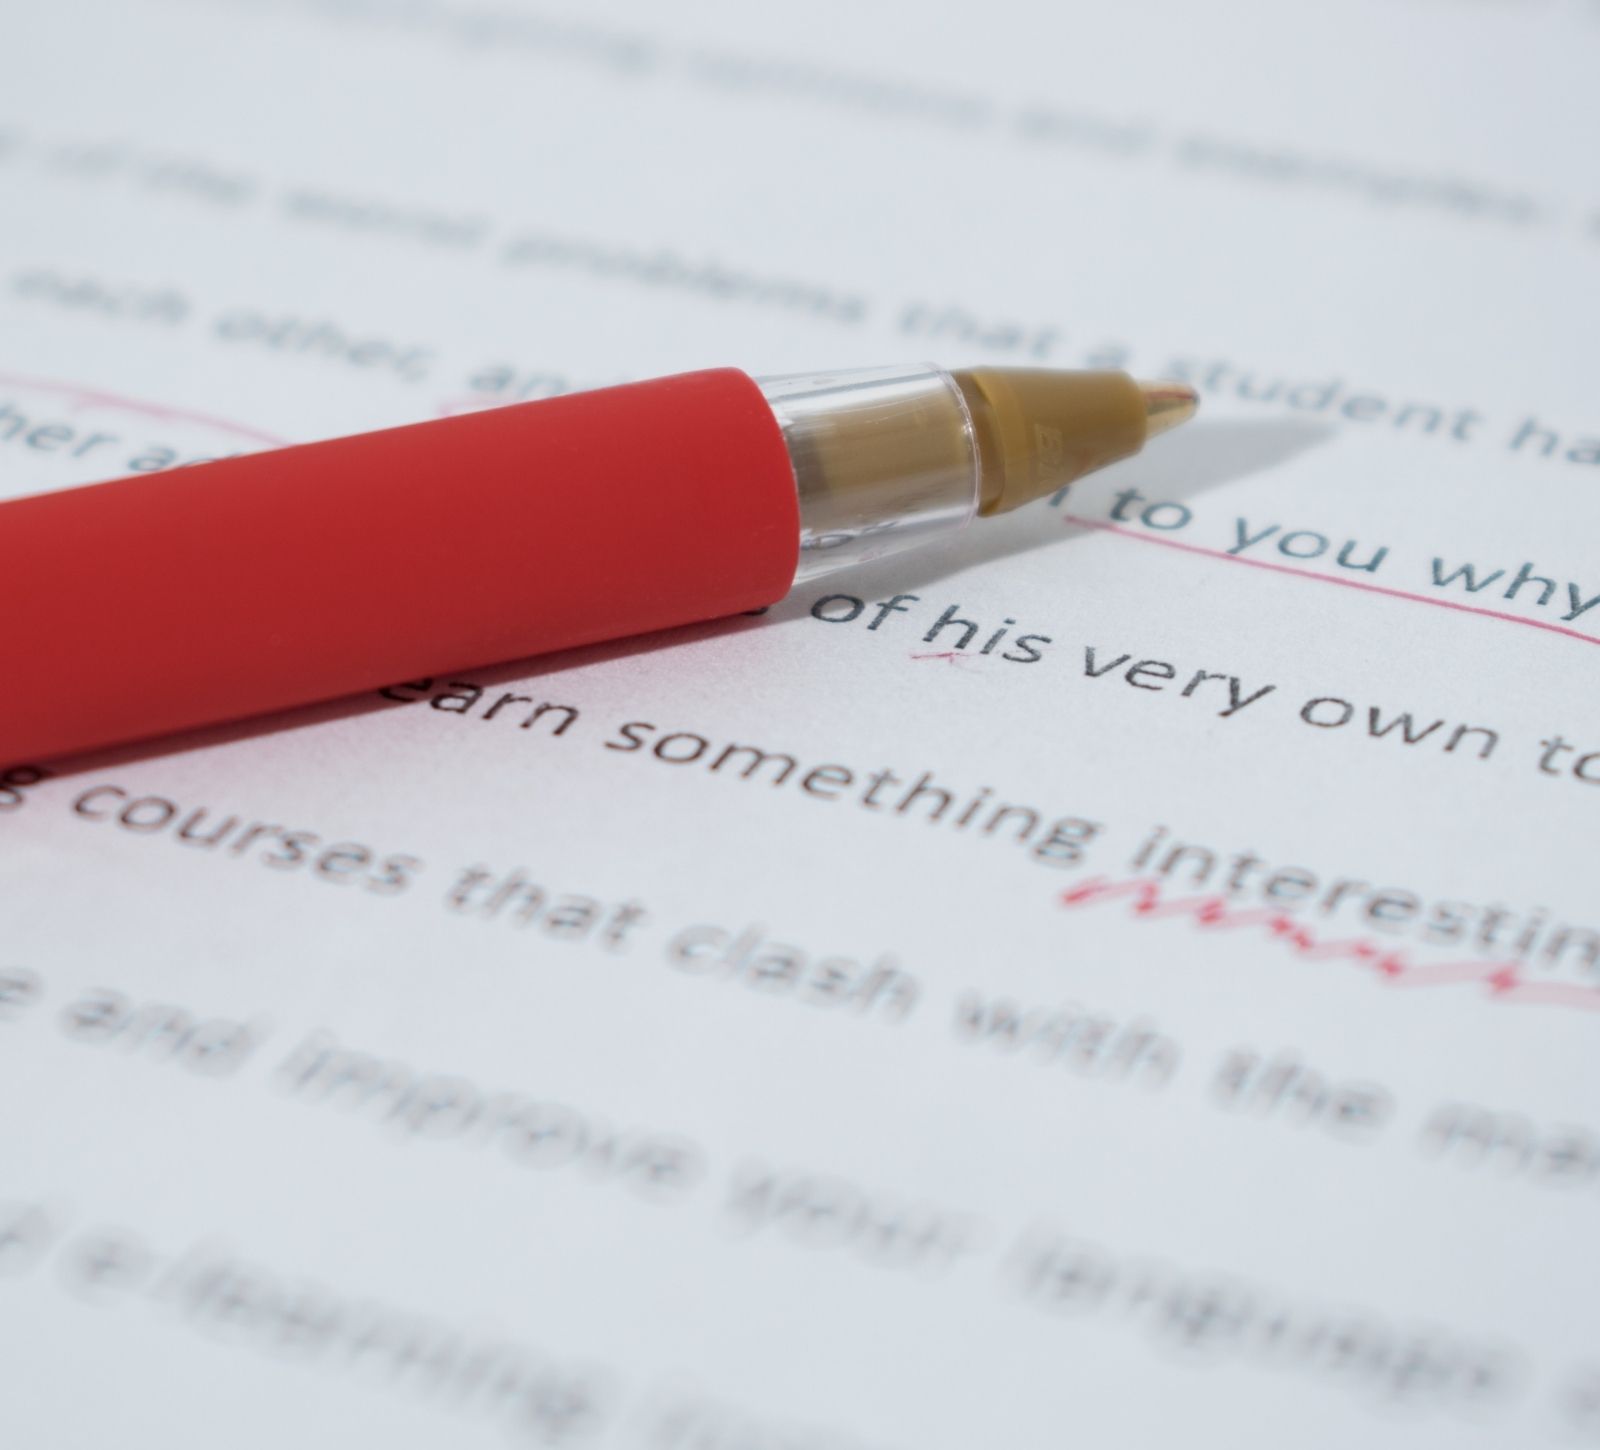 KTCEO Blog How To Use A Comma - 5 Ways- Red pen making edits on document